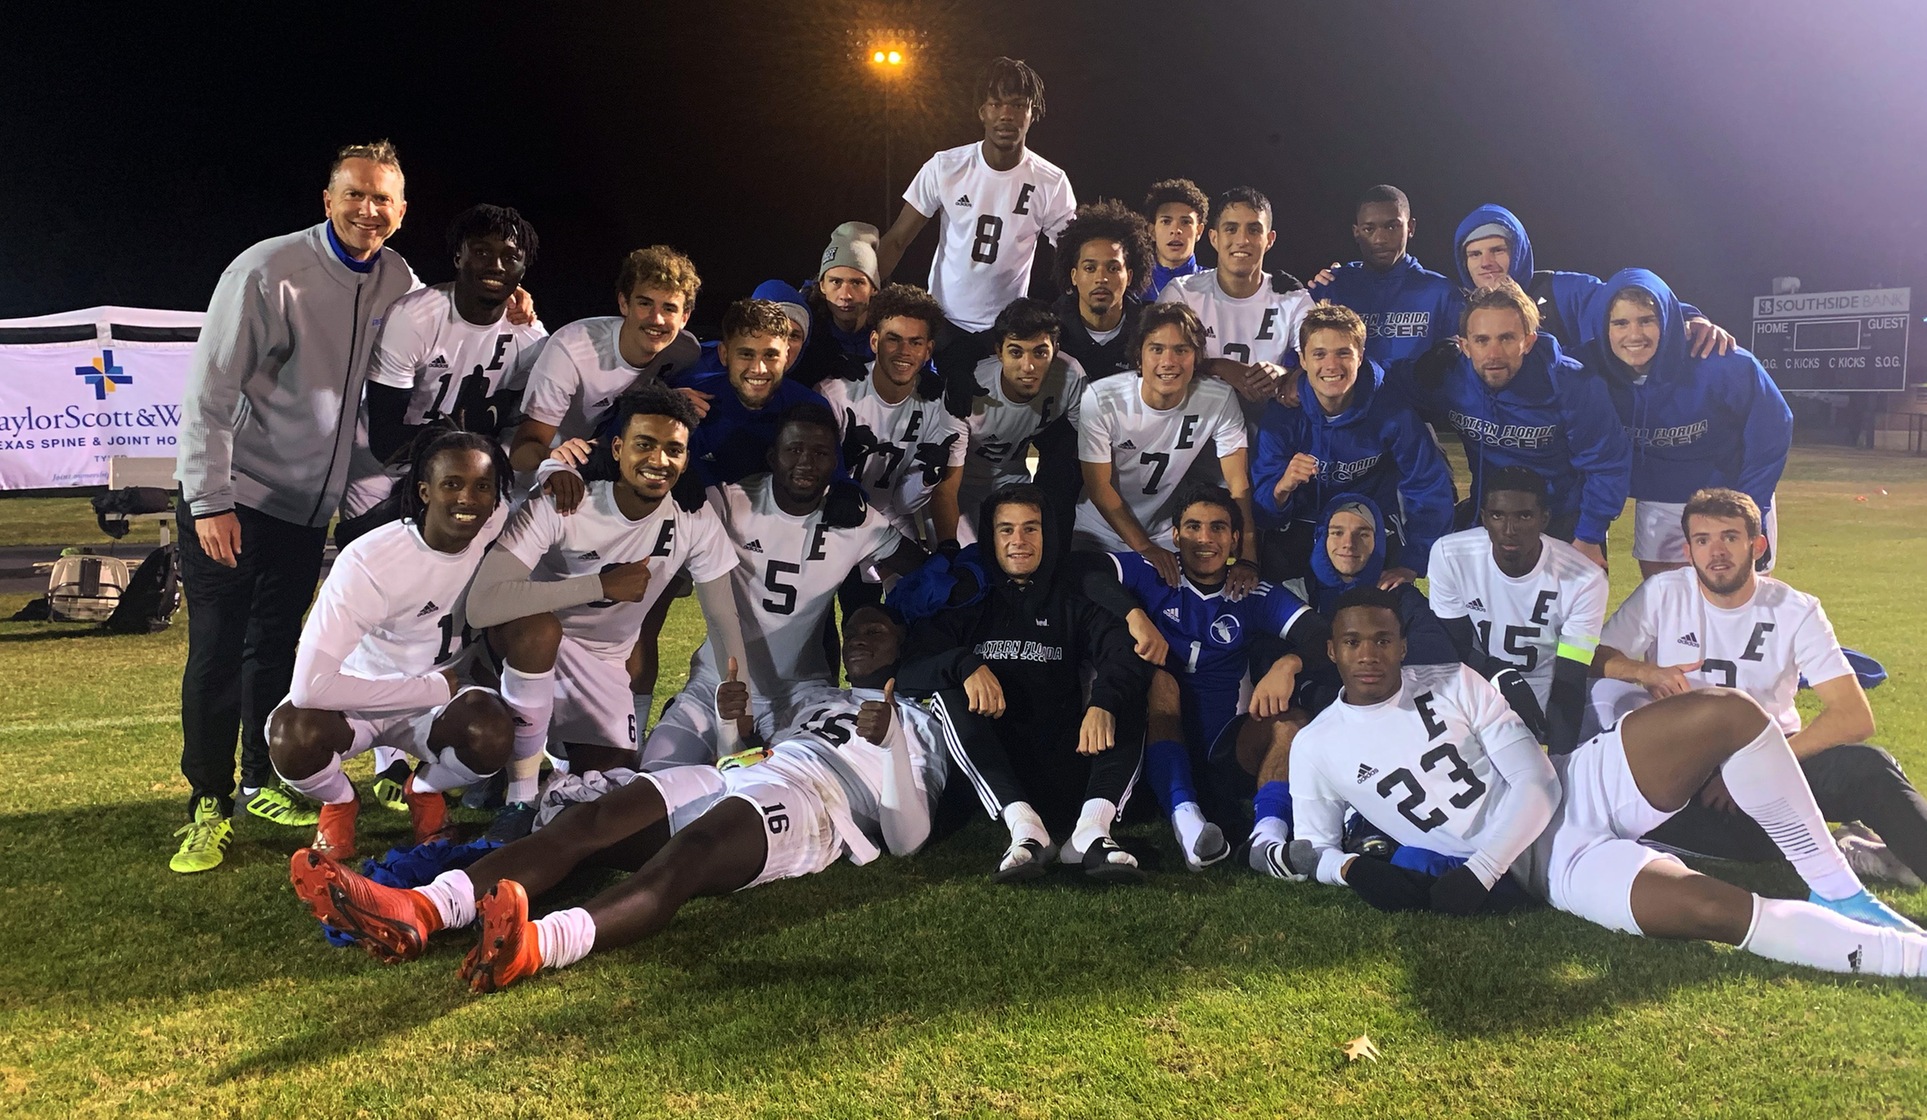 Men's soccer makes history, advances to national championship game